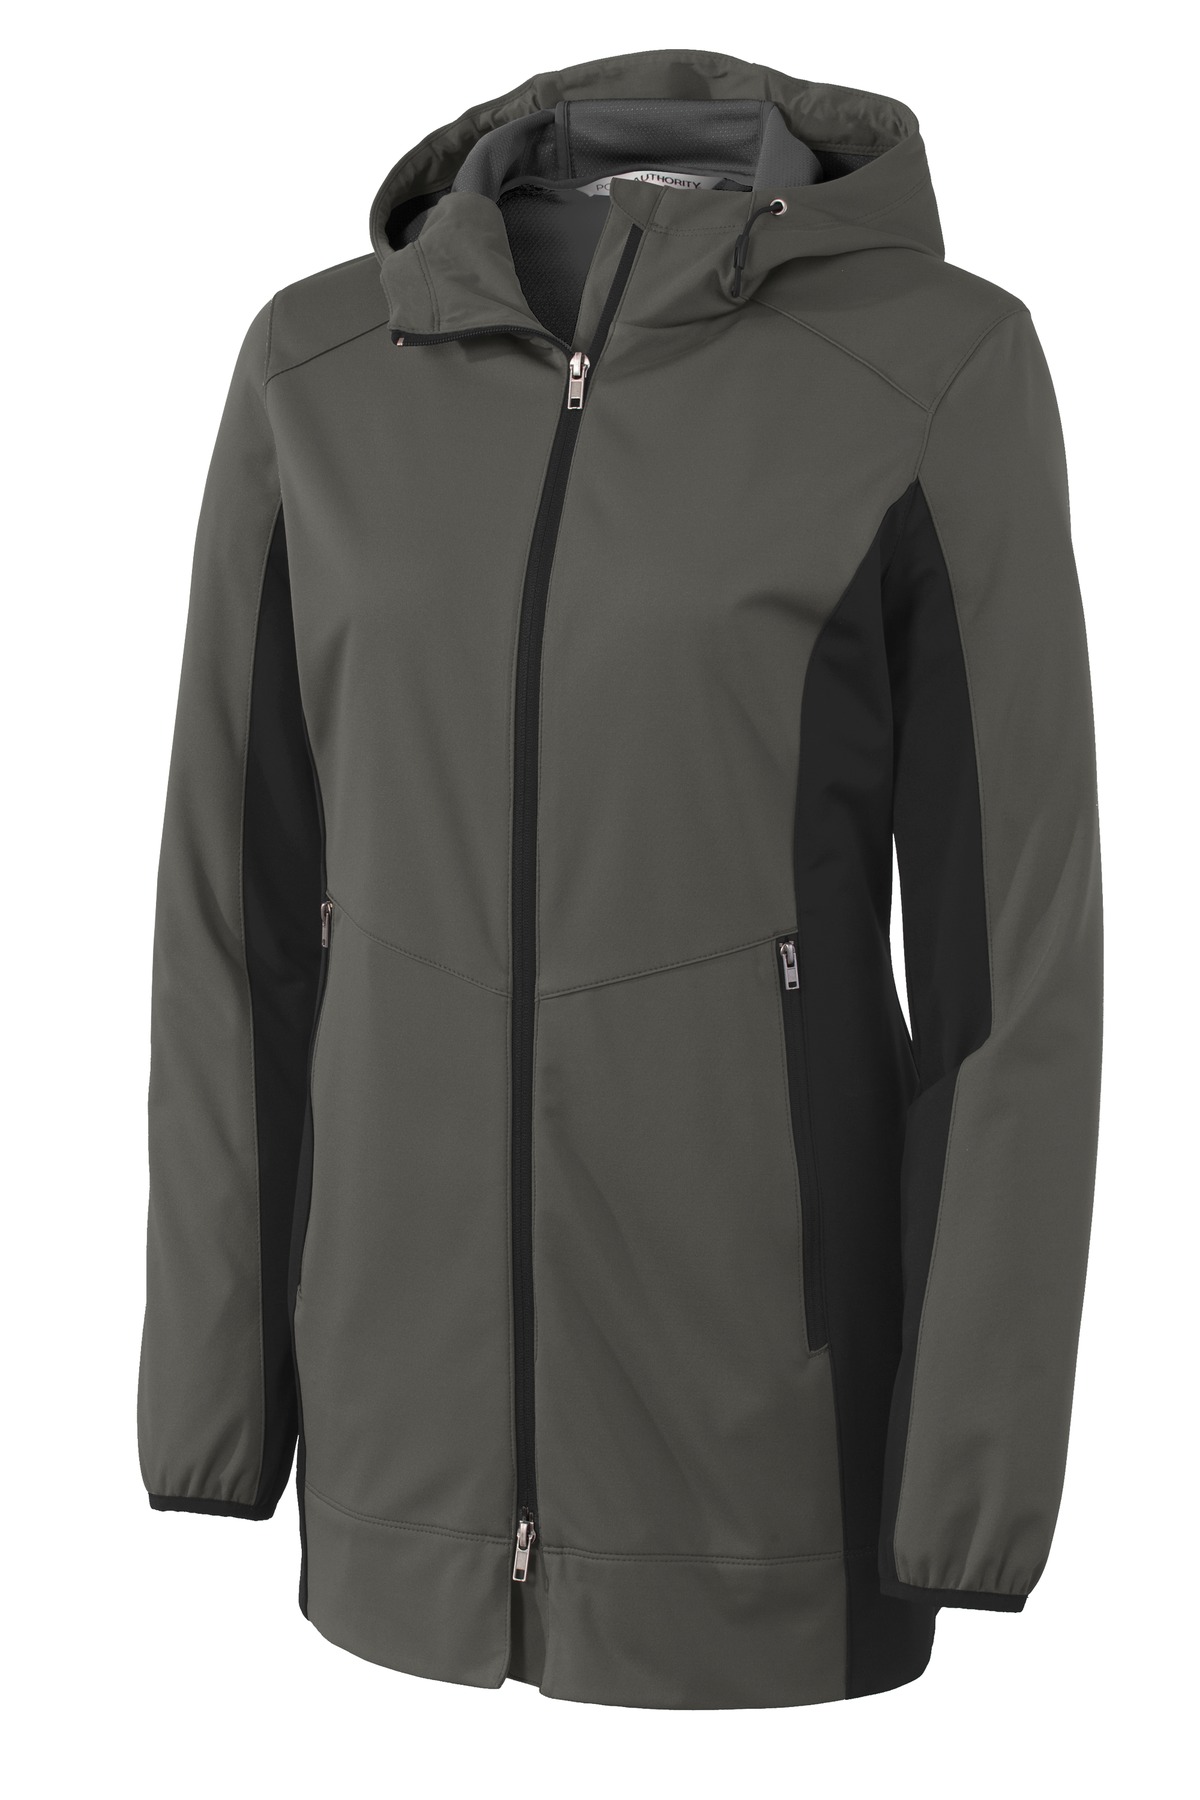 Port Authority Ladies Active Hooded Soft Shell Jacket-L (Grey Steel/ Deep Black) - image 5 of 6